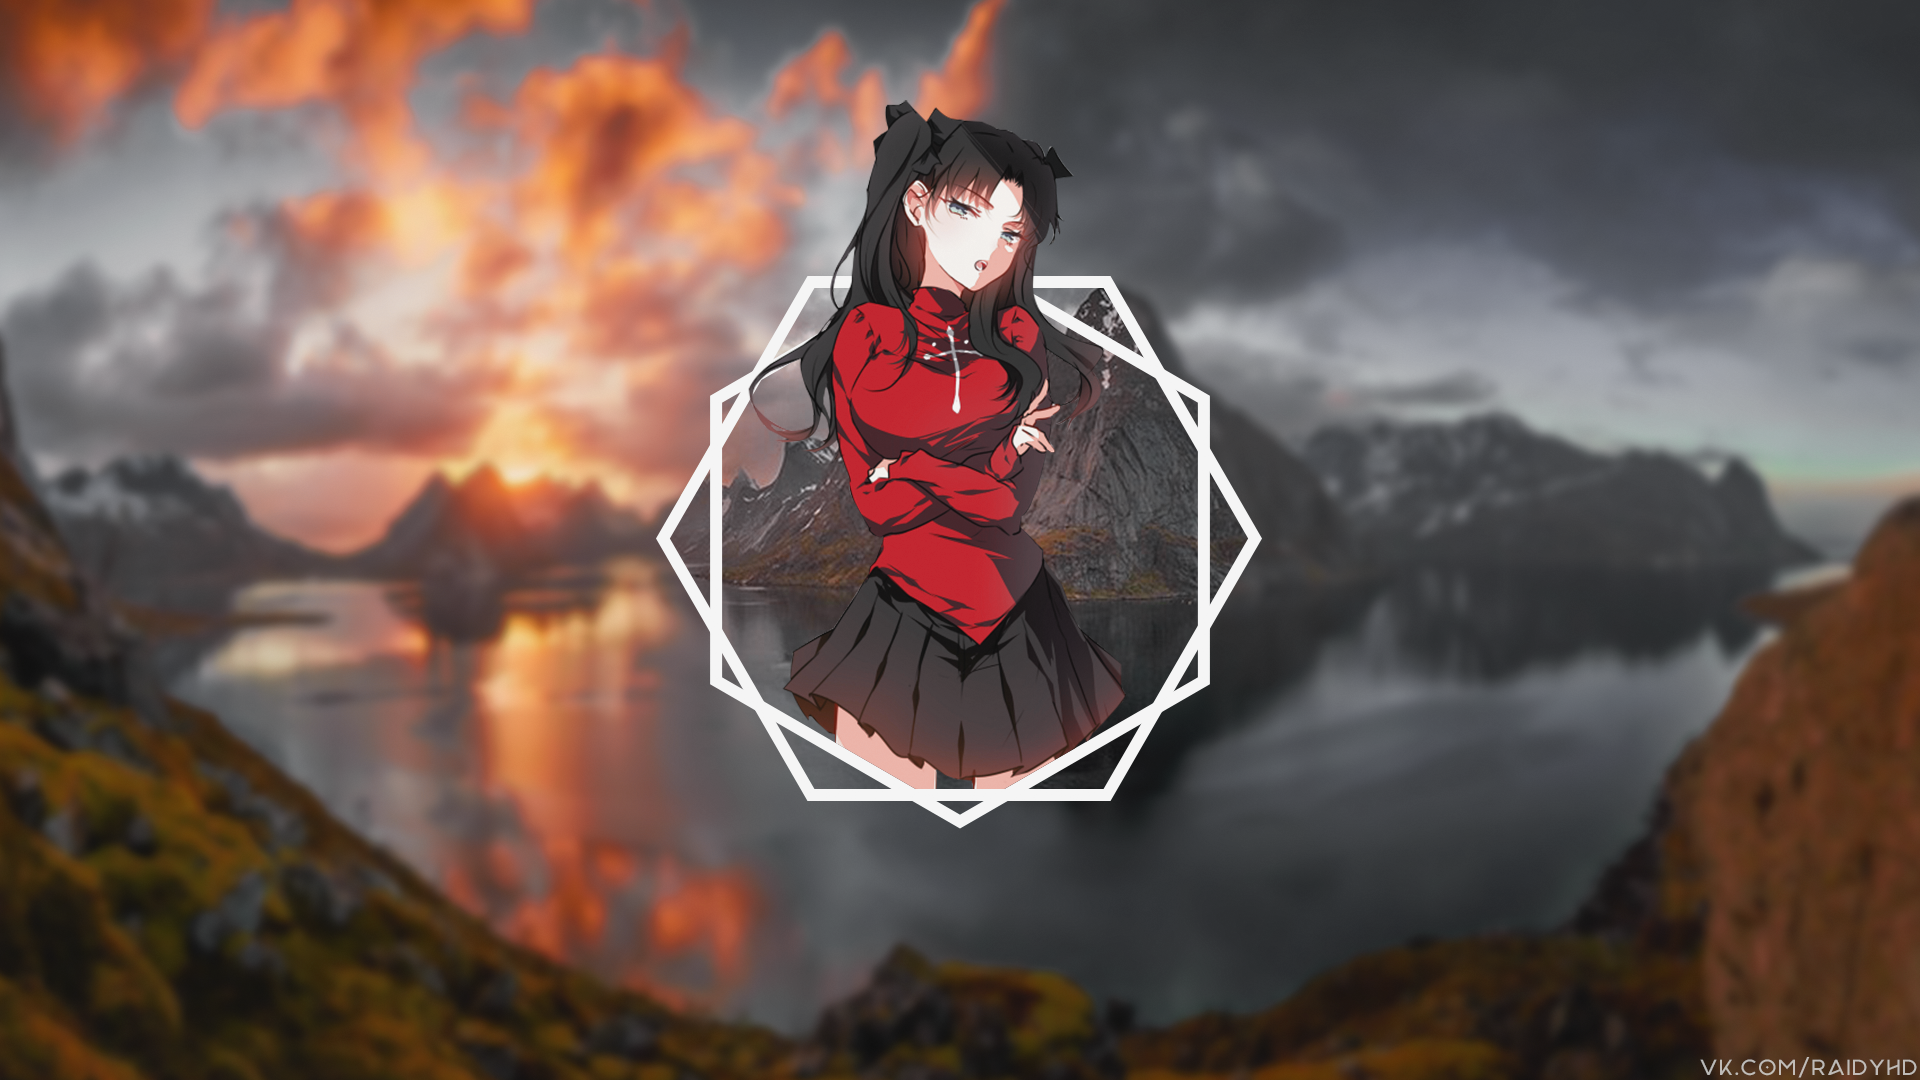 Anime 1920x1080 Tohsaka Rin anime anime girls picture-in-picture Fate/Stay Night